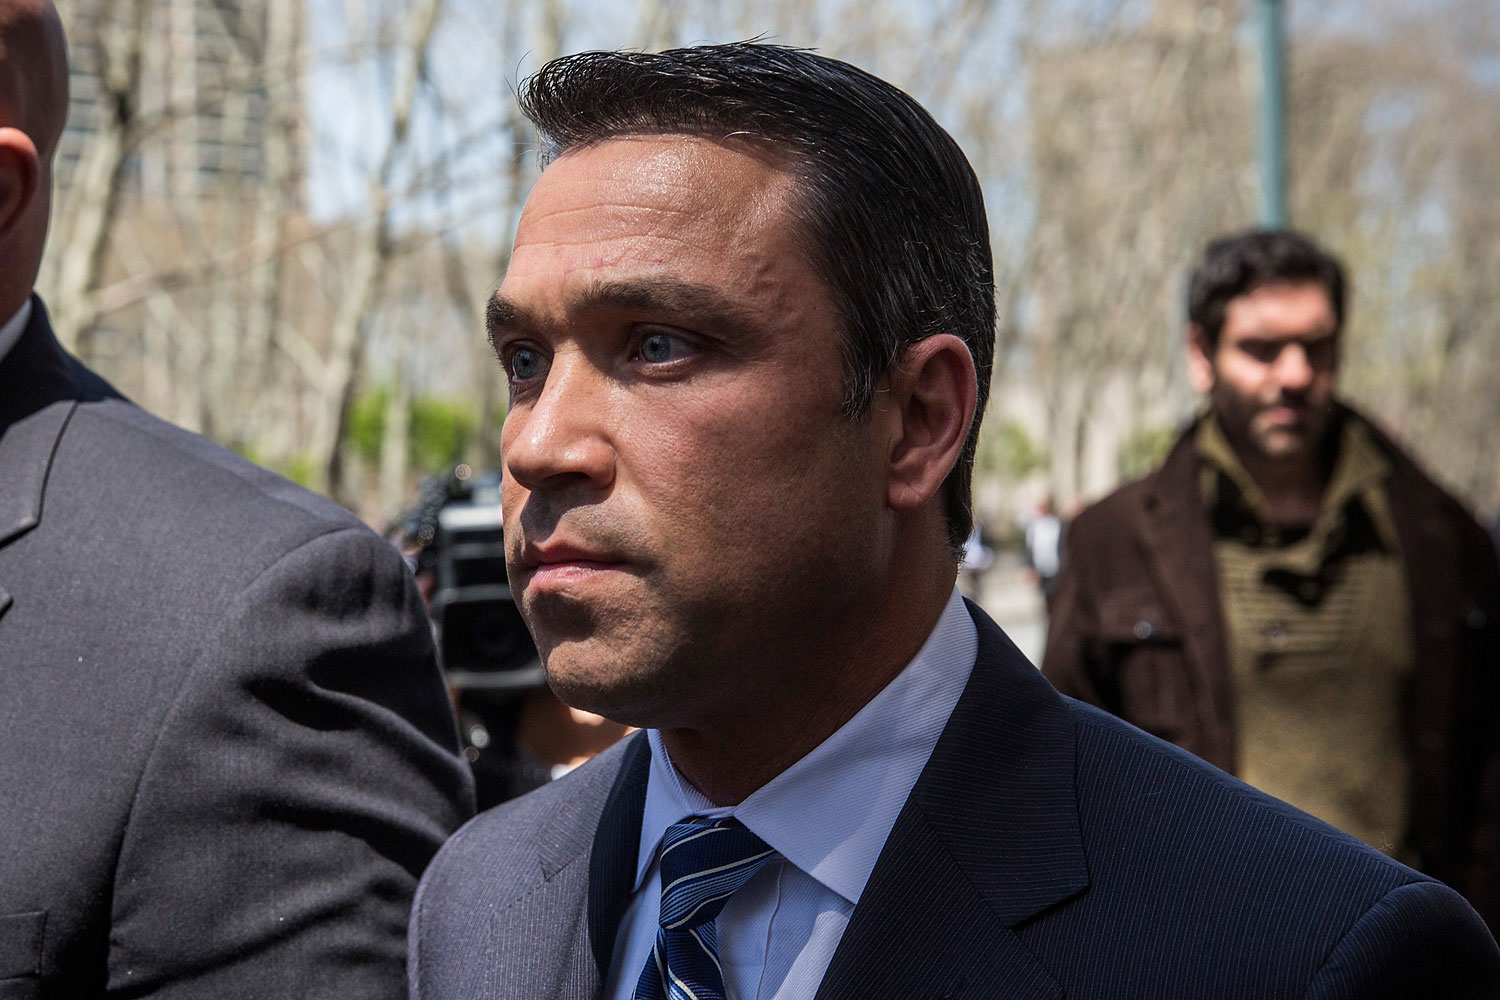 Representative Michael Grimm walks out of Brooklyn Federal Court after being indicted on 20 counts on April 28, 2014 in New York.